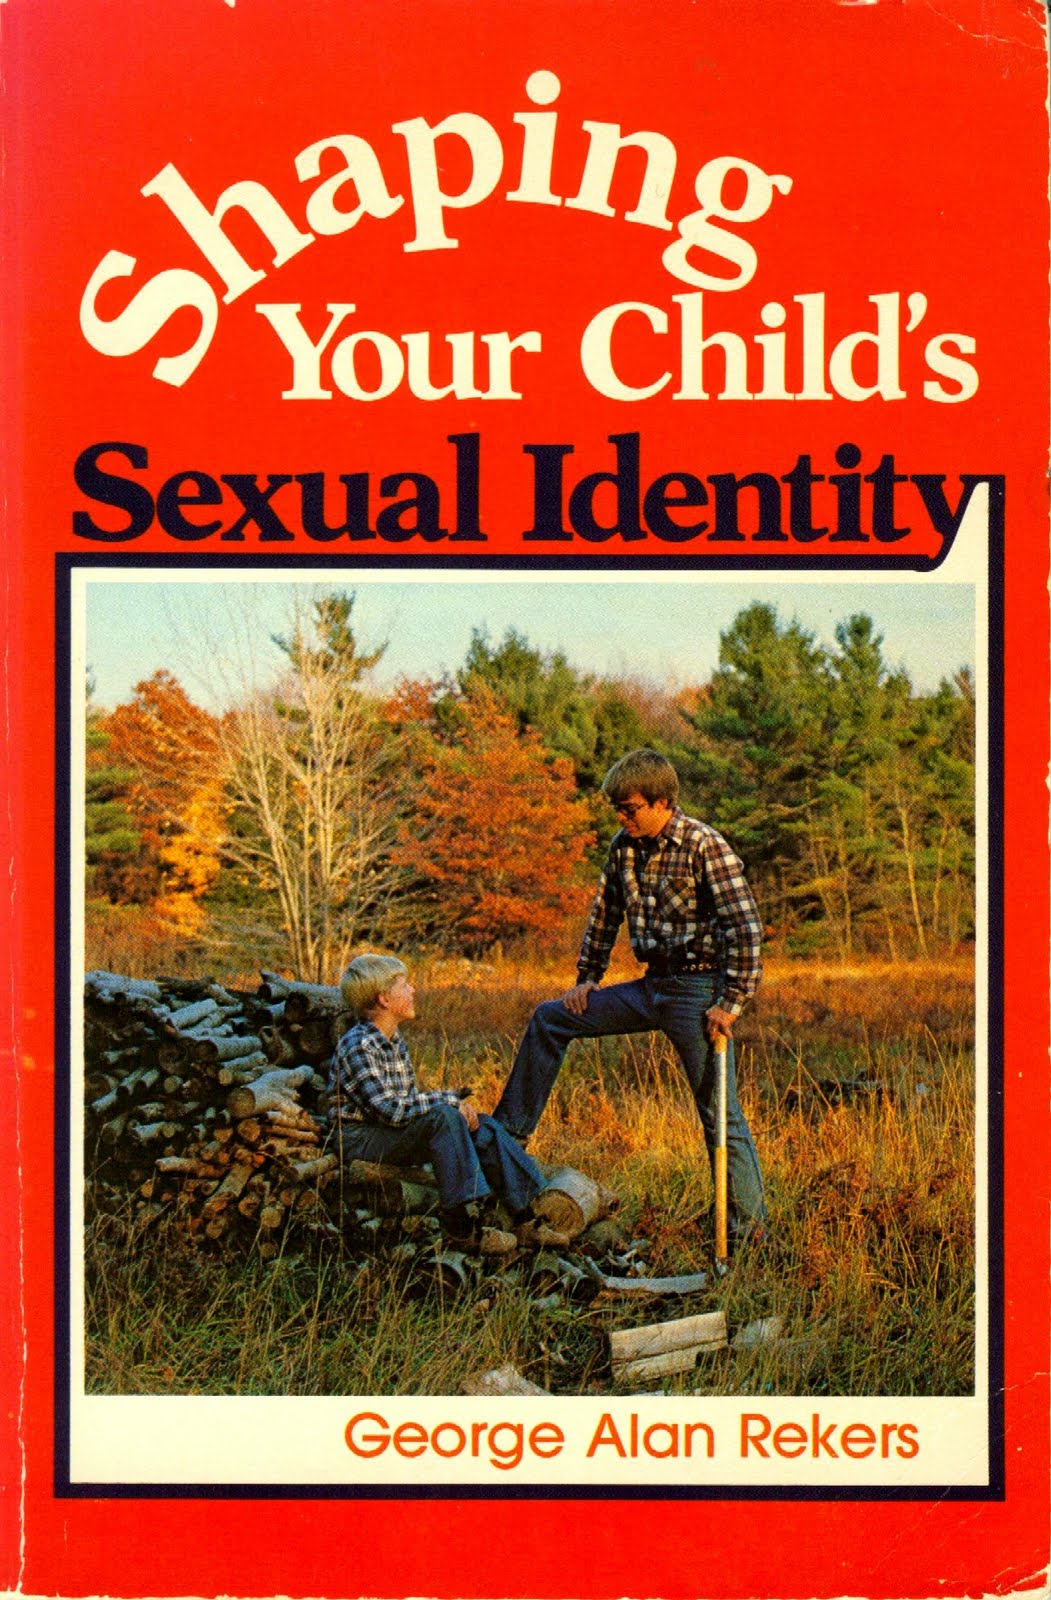 SHAPING YOUR CHILD'S SEXUAL IDENTITY